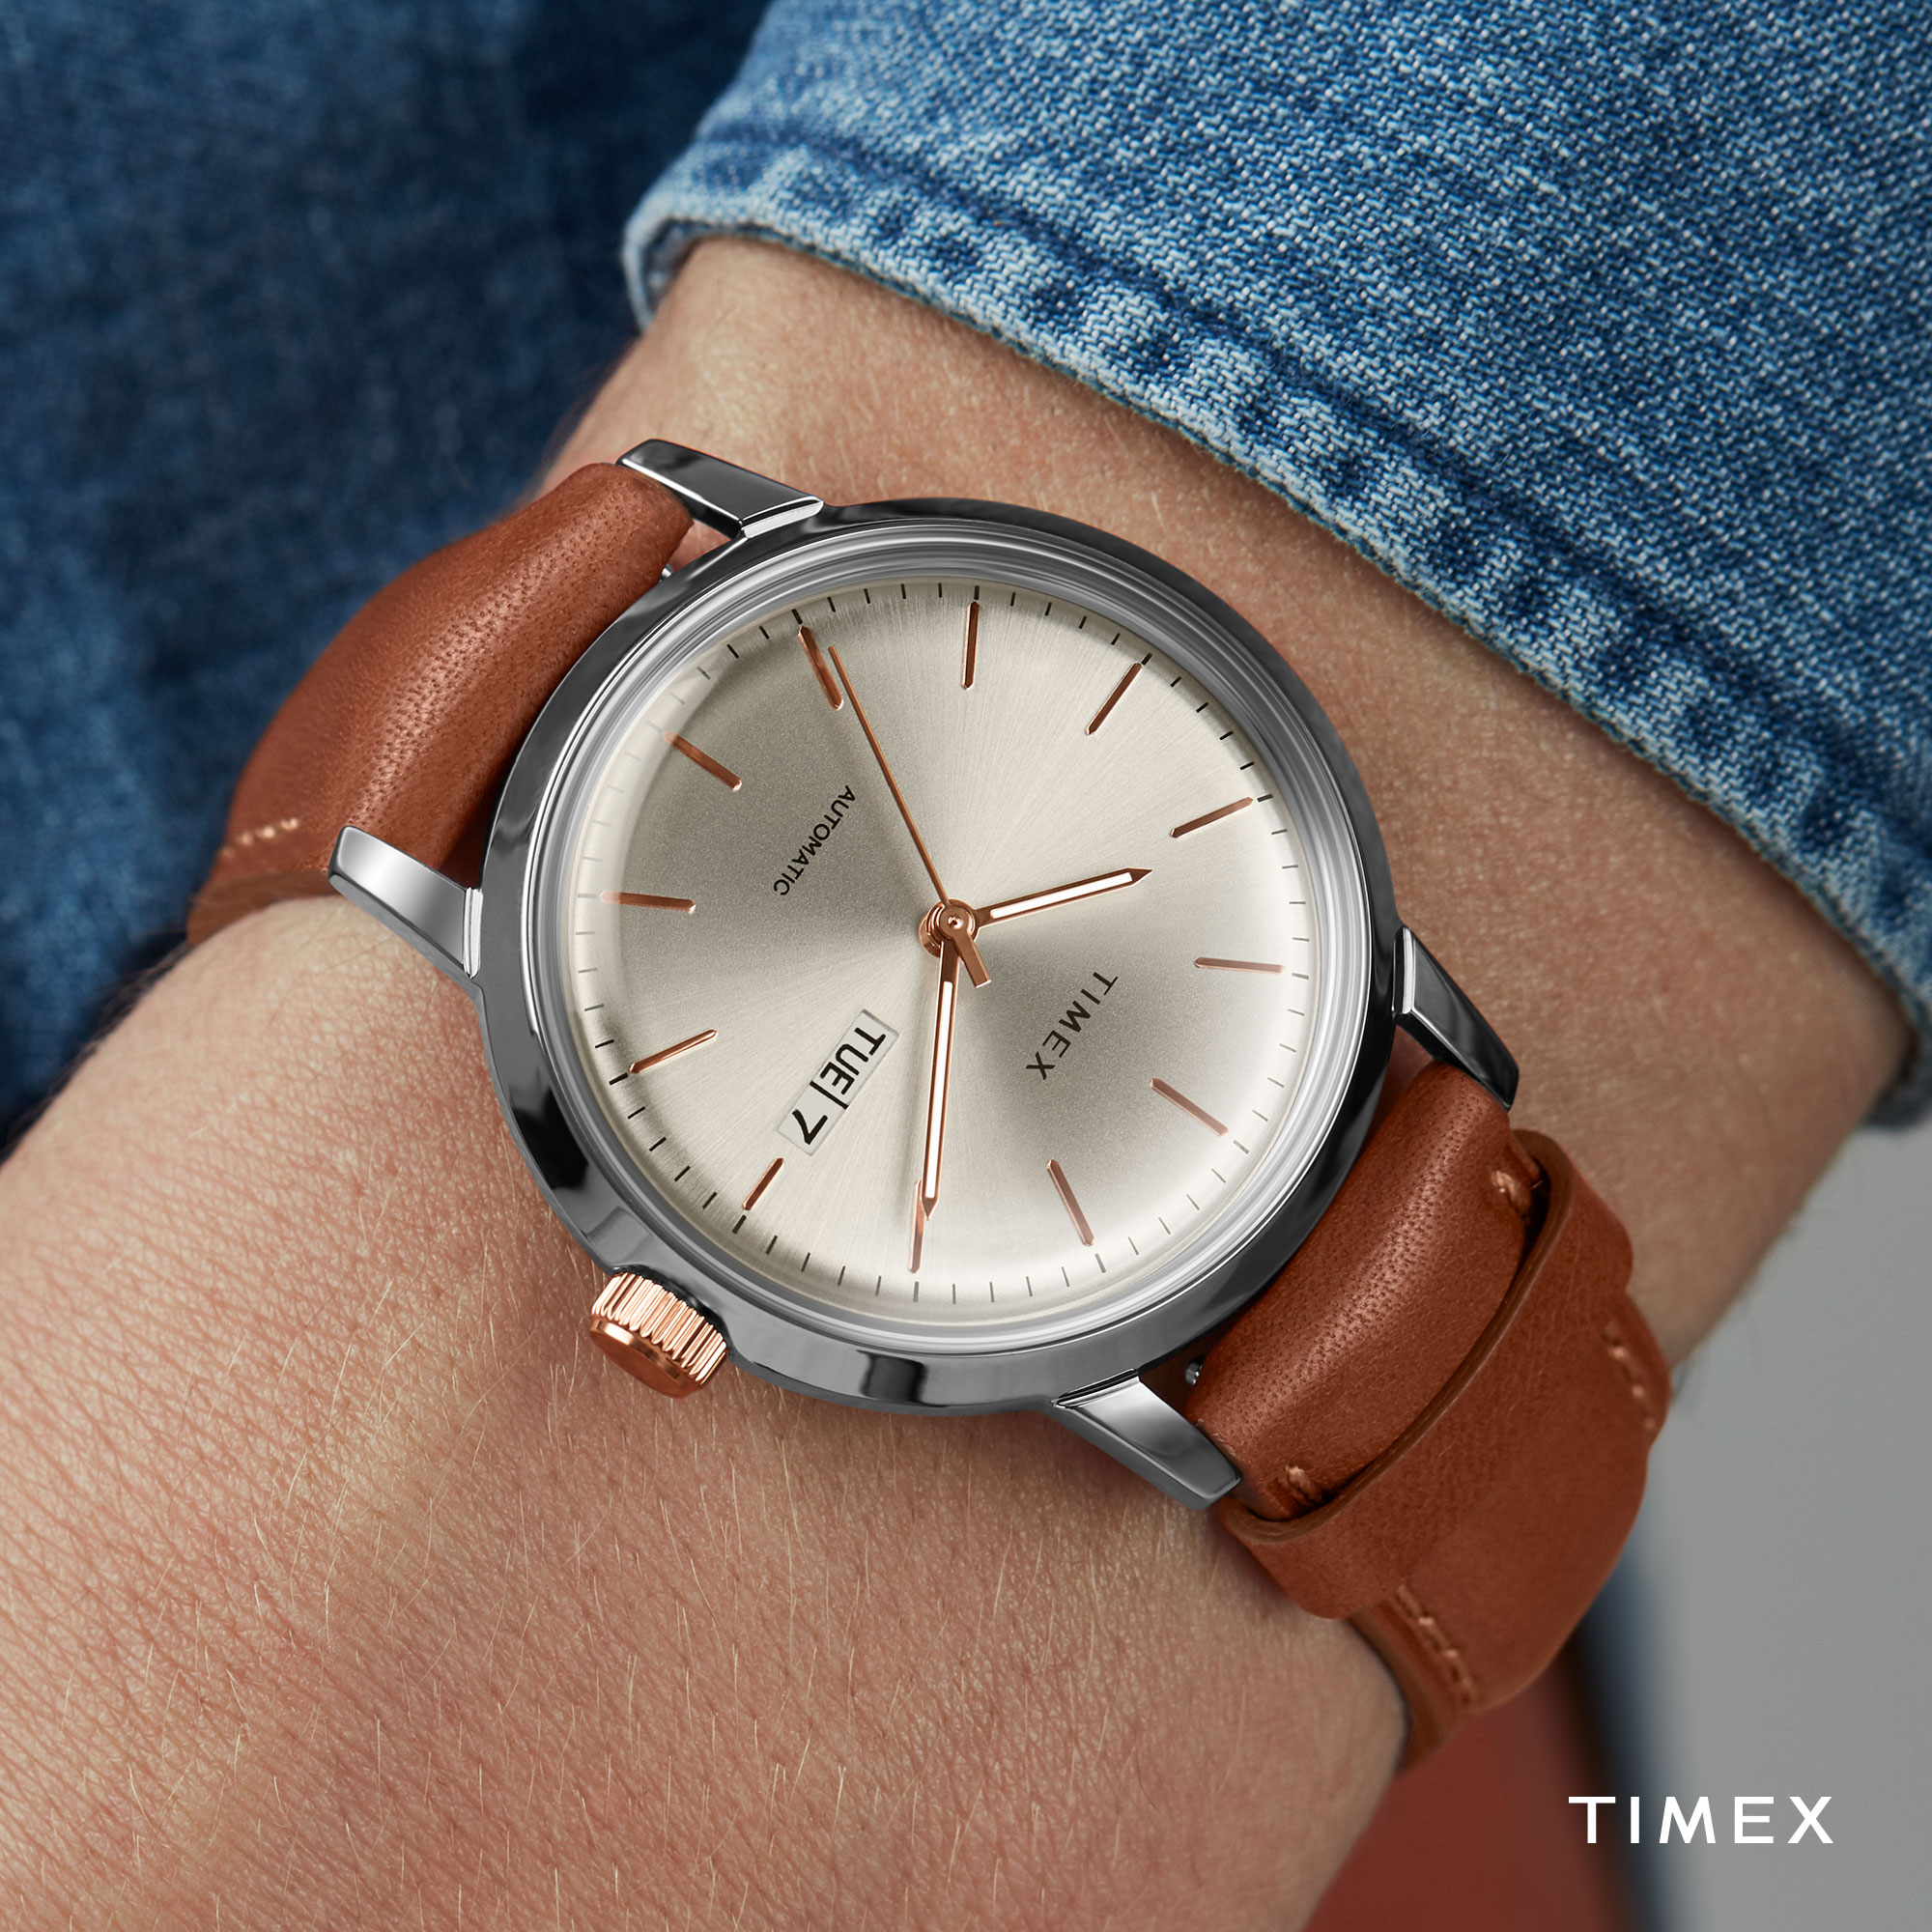 A Timex & Judith Leiber Collaboration: Bring in Sparkle from the Runway to the Wrist!